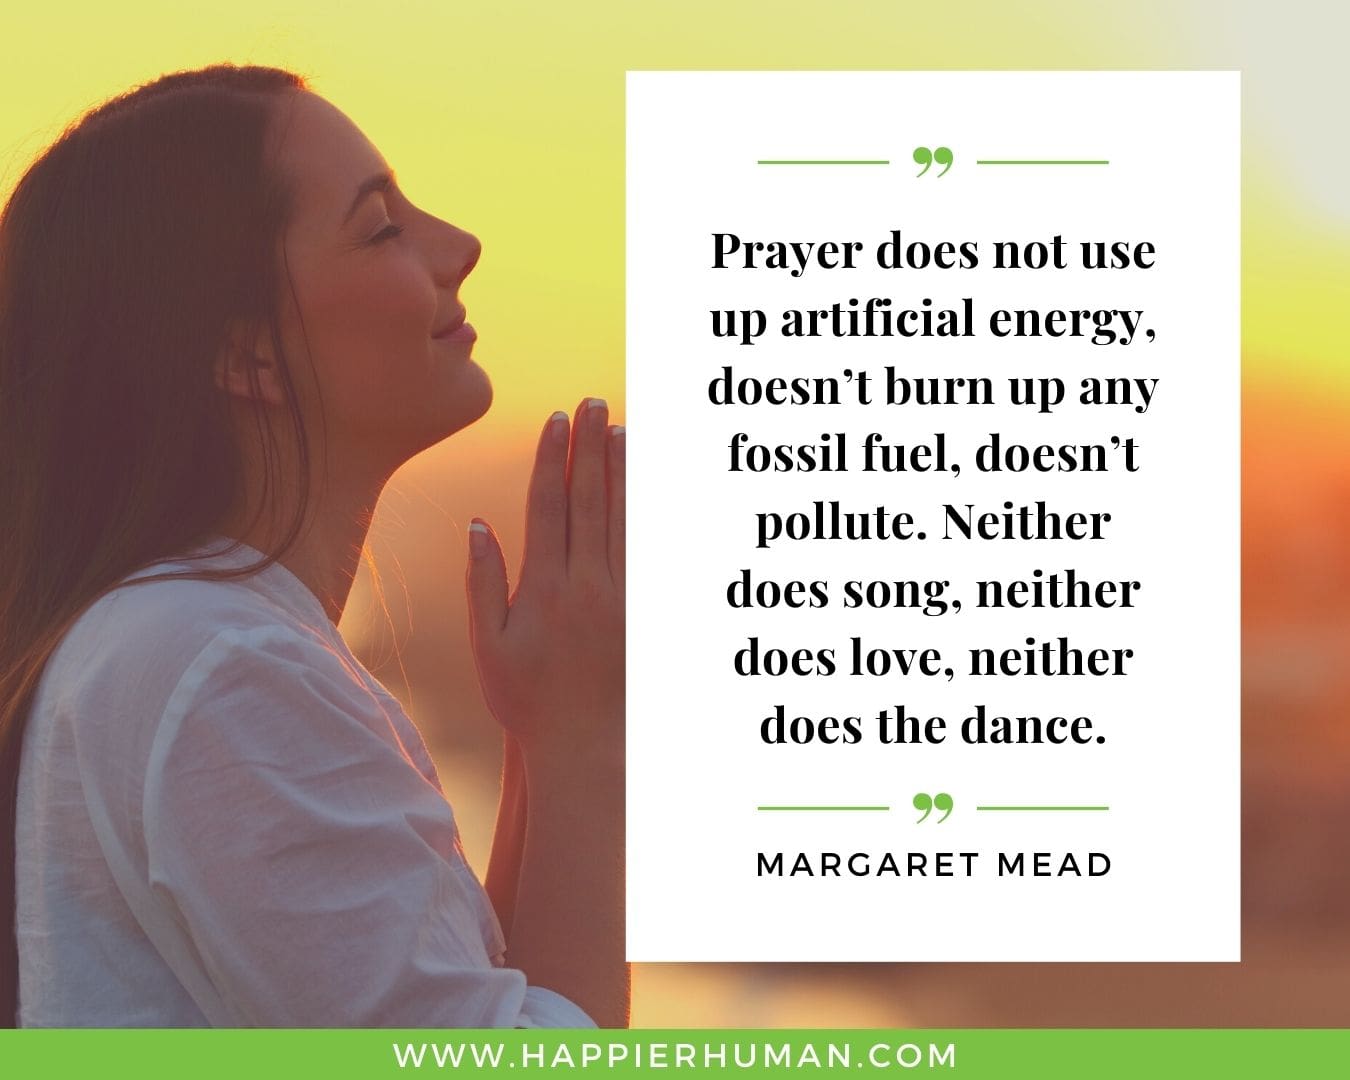 Positive Energy Quotes - “Prayer does not use up artificial energy, doesn’t burn up any fossil fuel, doesn’t pollute. Neither does song, neither does love, neither does the dance.” - Margaret Mead